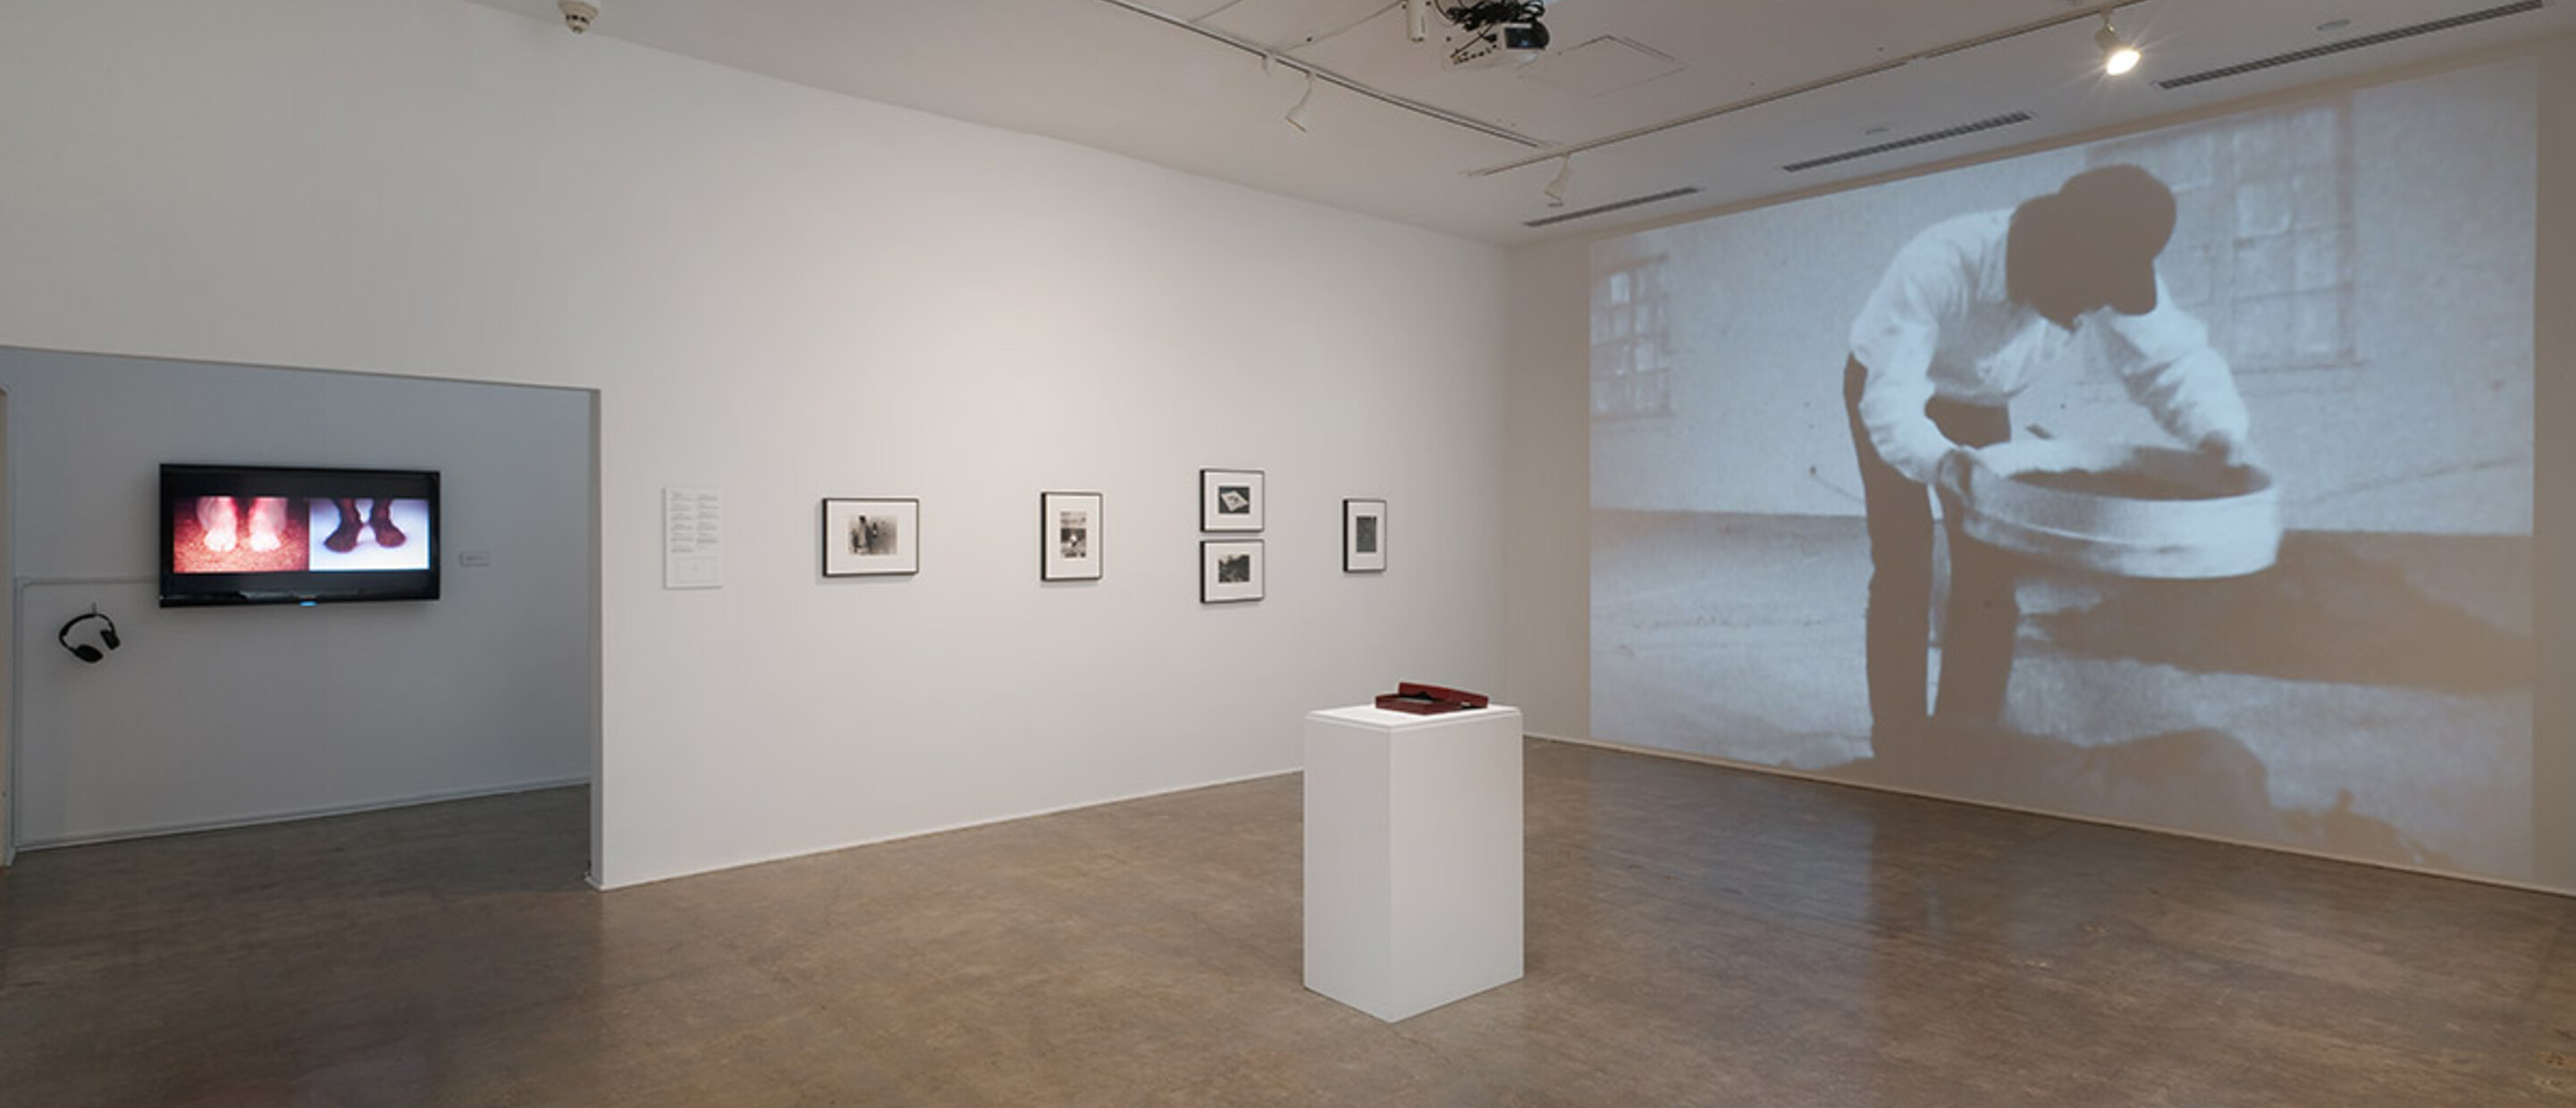 Installation View of Project Series 46: Hirokazu Kosaka: On the Verandah Selected Works 1969 - 1974 at the Pomona College Museum of Art. Photo Credit: Robert Wedemeyer. View 4.